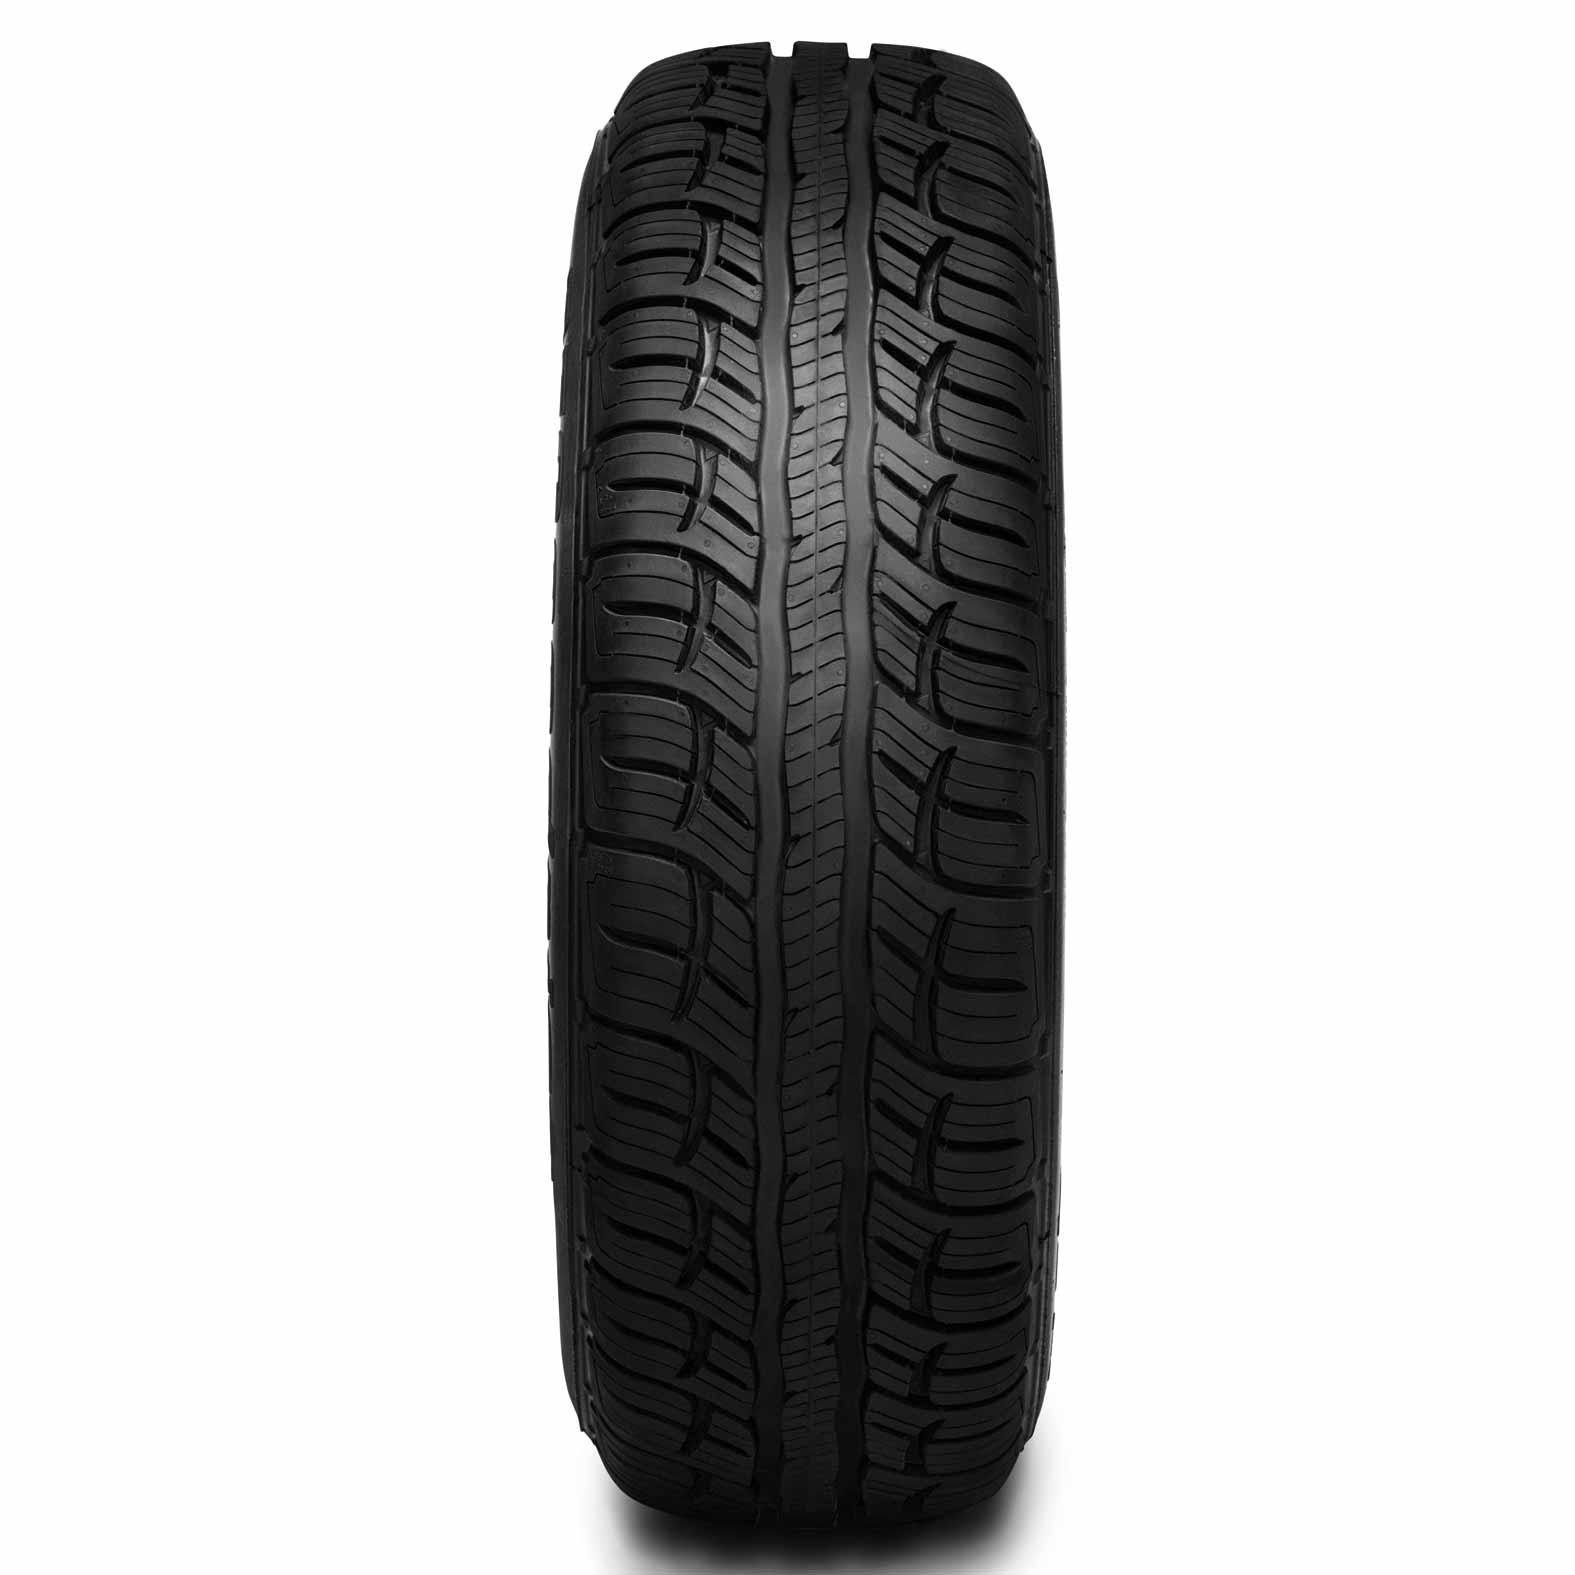 BFGoodrich Advantage T/A Sport LT Tires for All-Weather